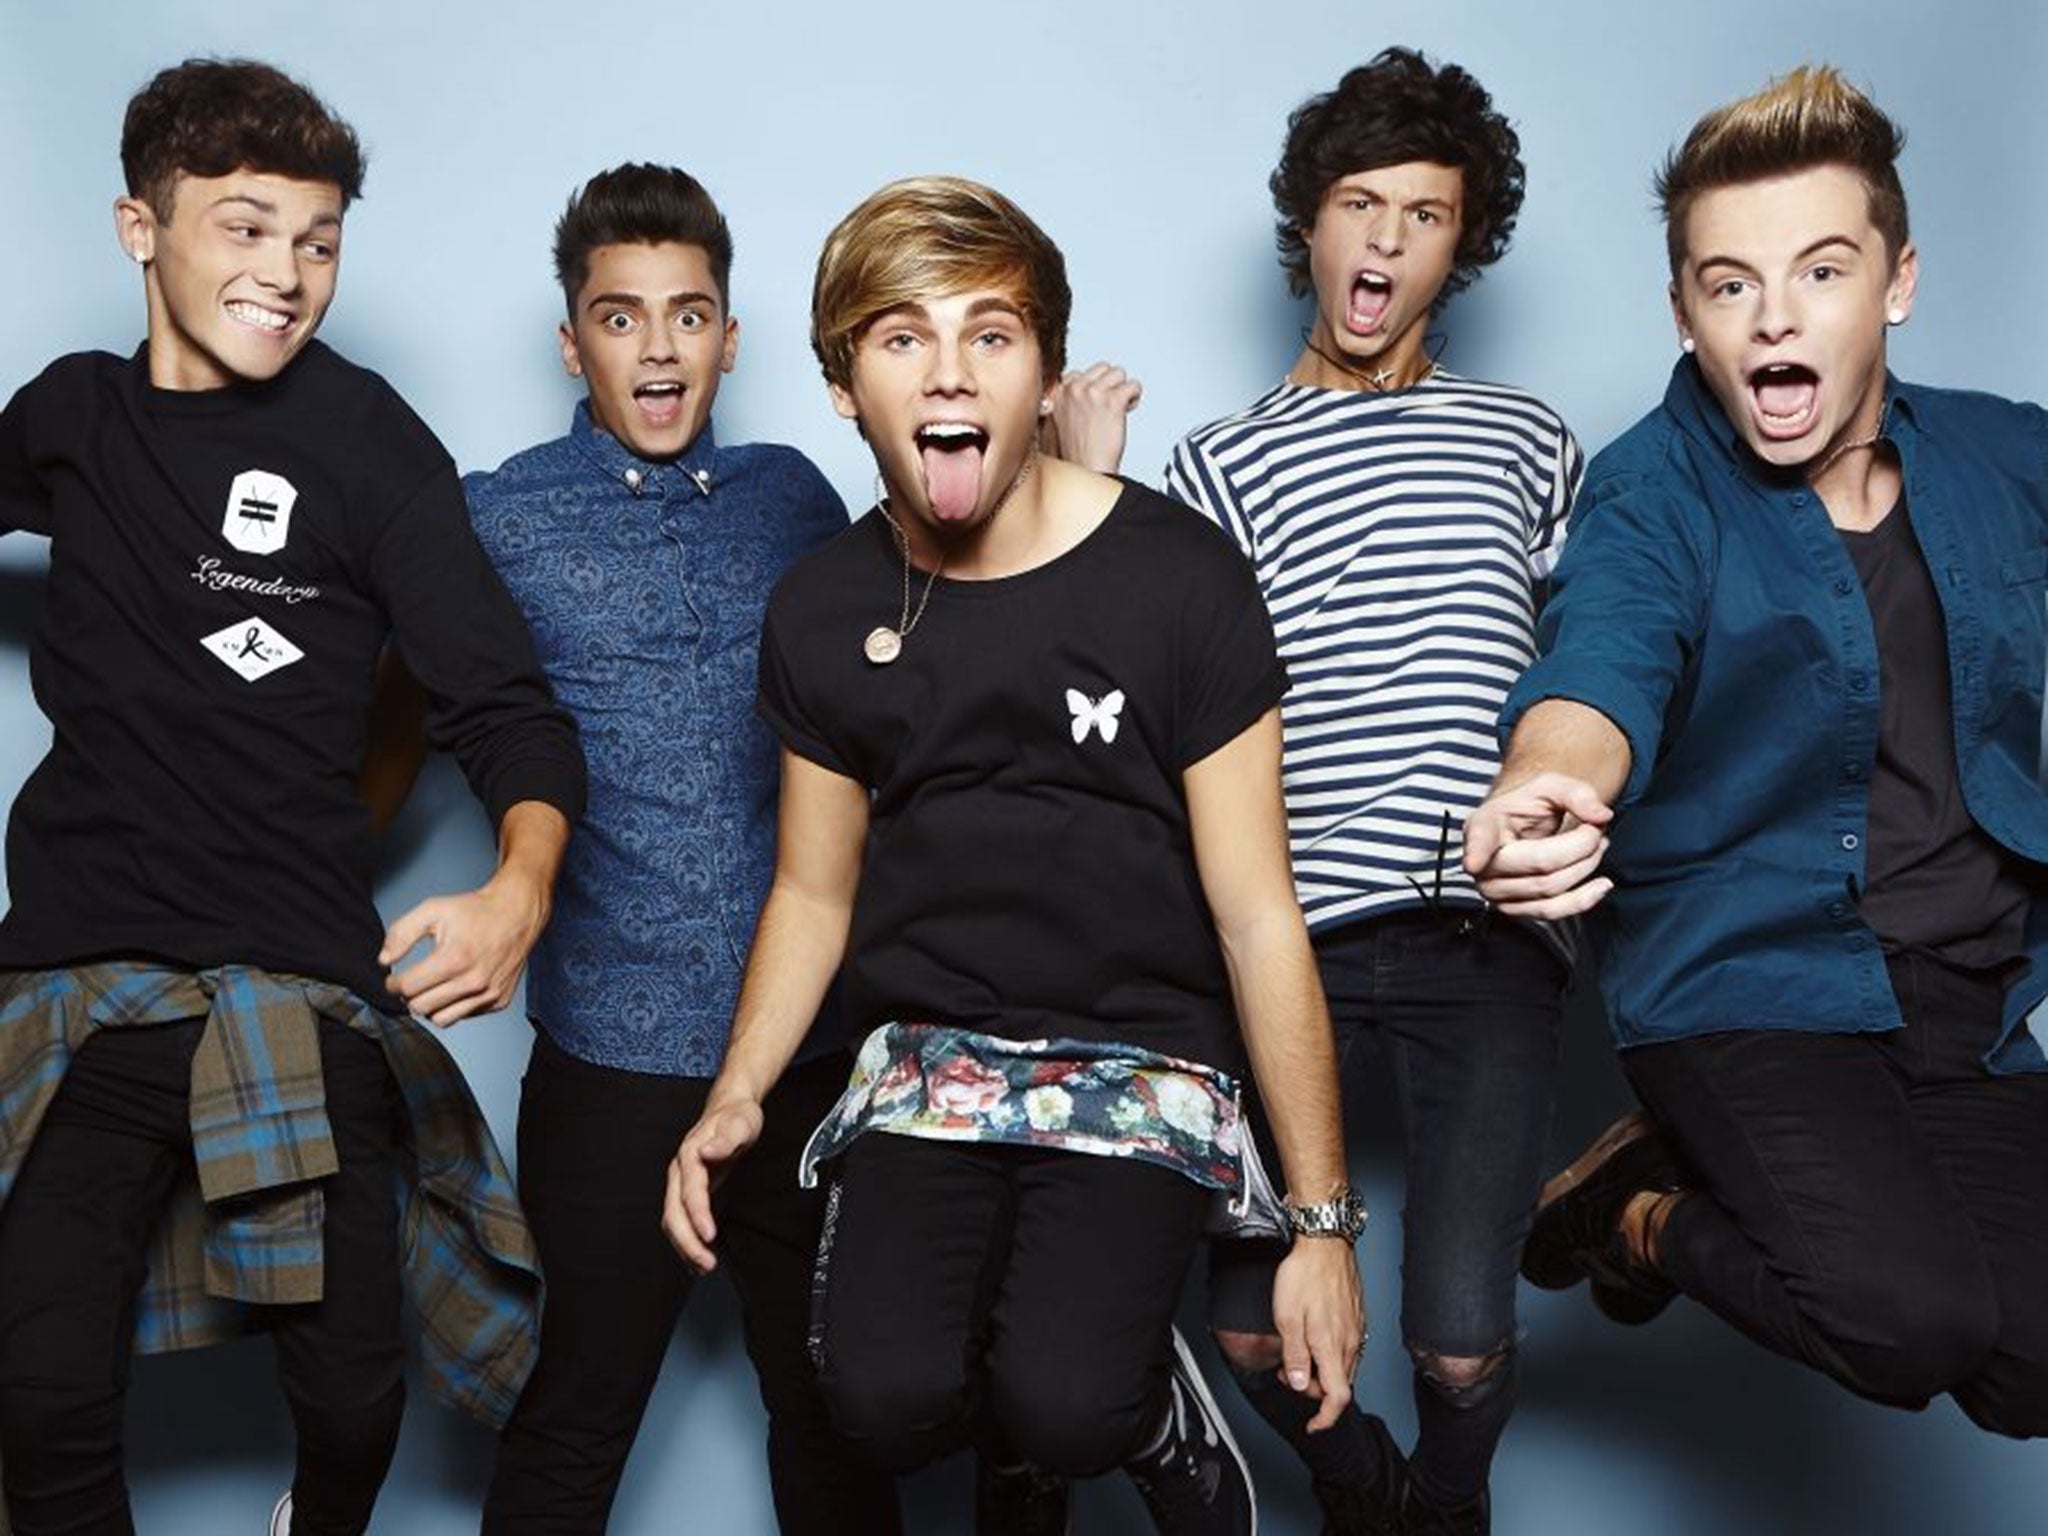 Overload Generation were voted out following a sing-off